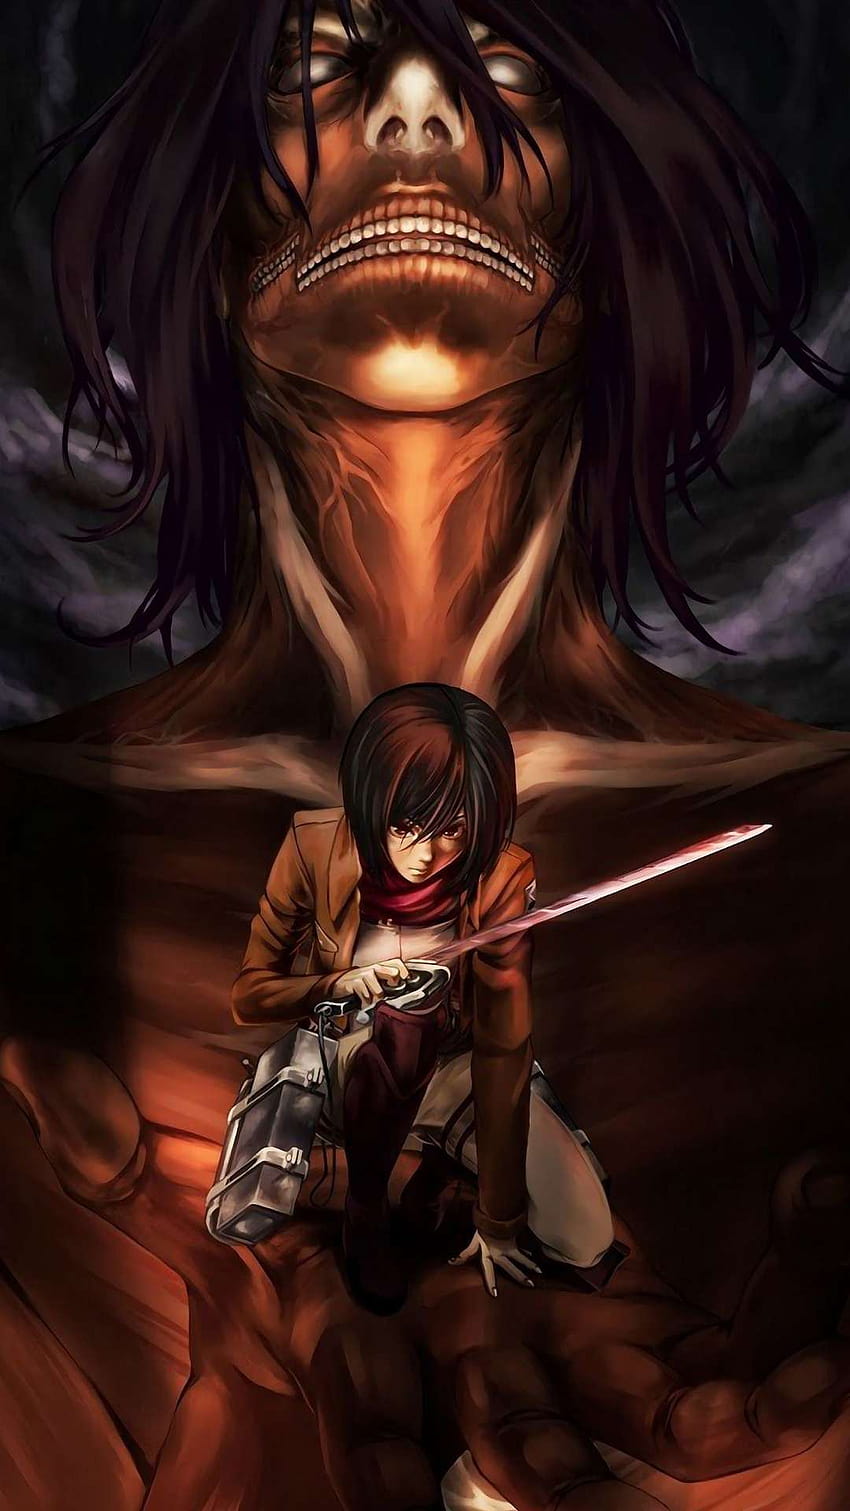 5 Mikasa Ackerman for iPhone and Android by Chelsea Reed, mikasa aot HD phone wallpaper